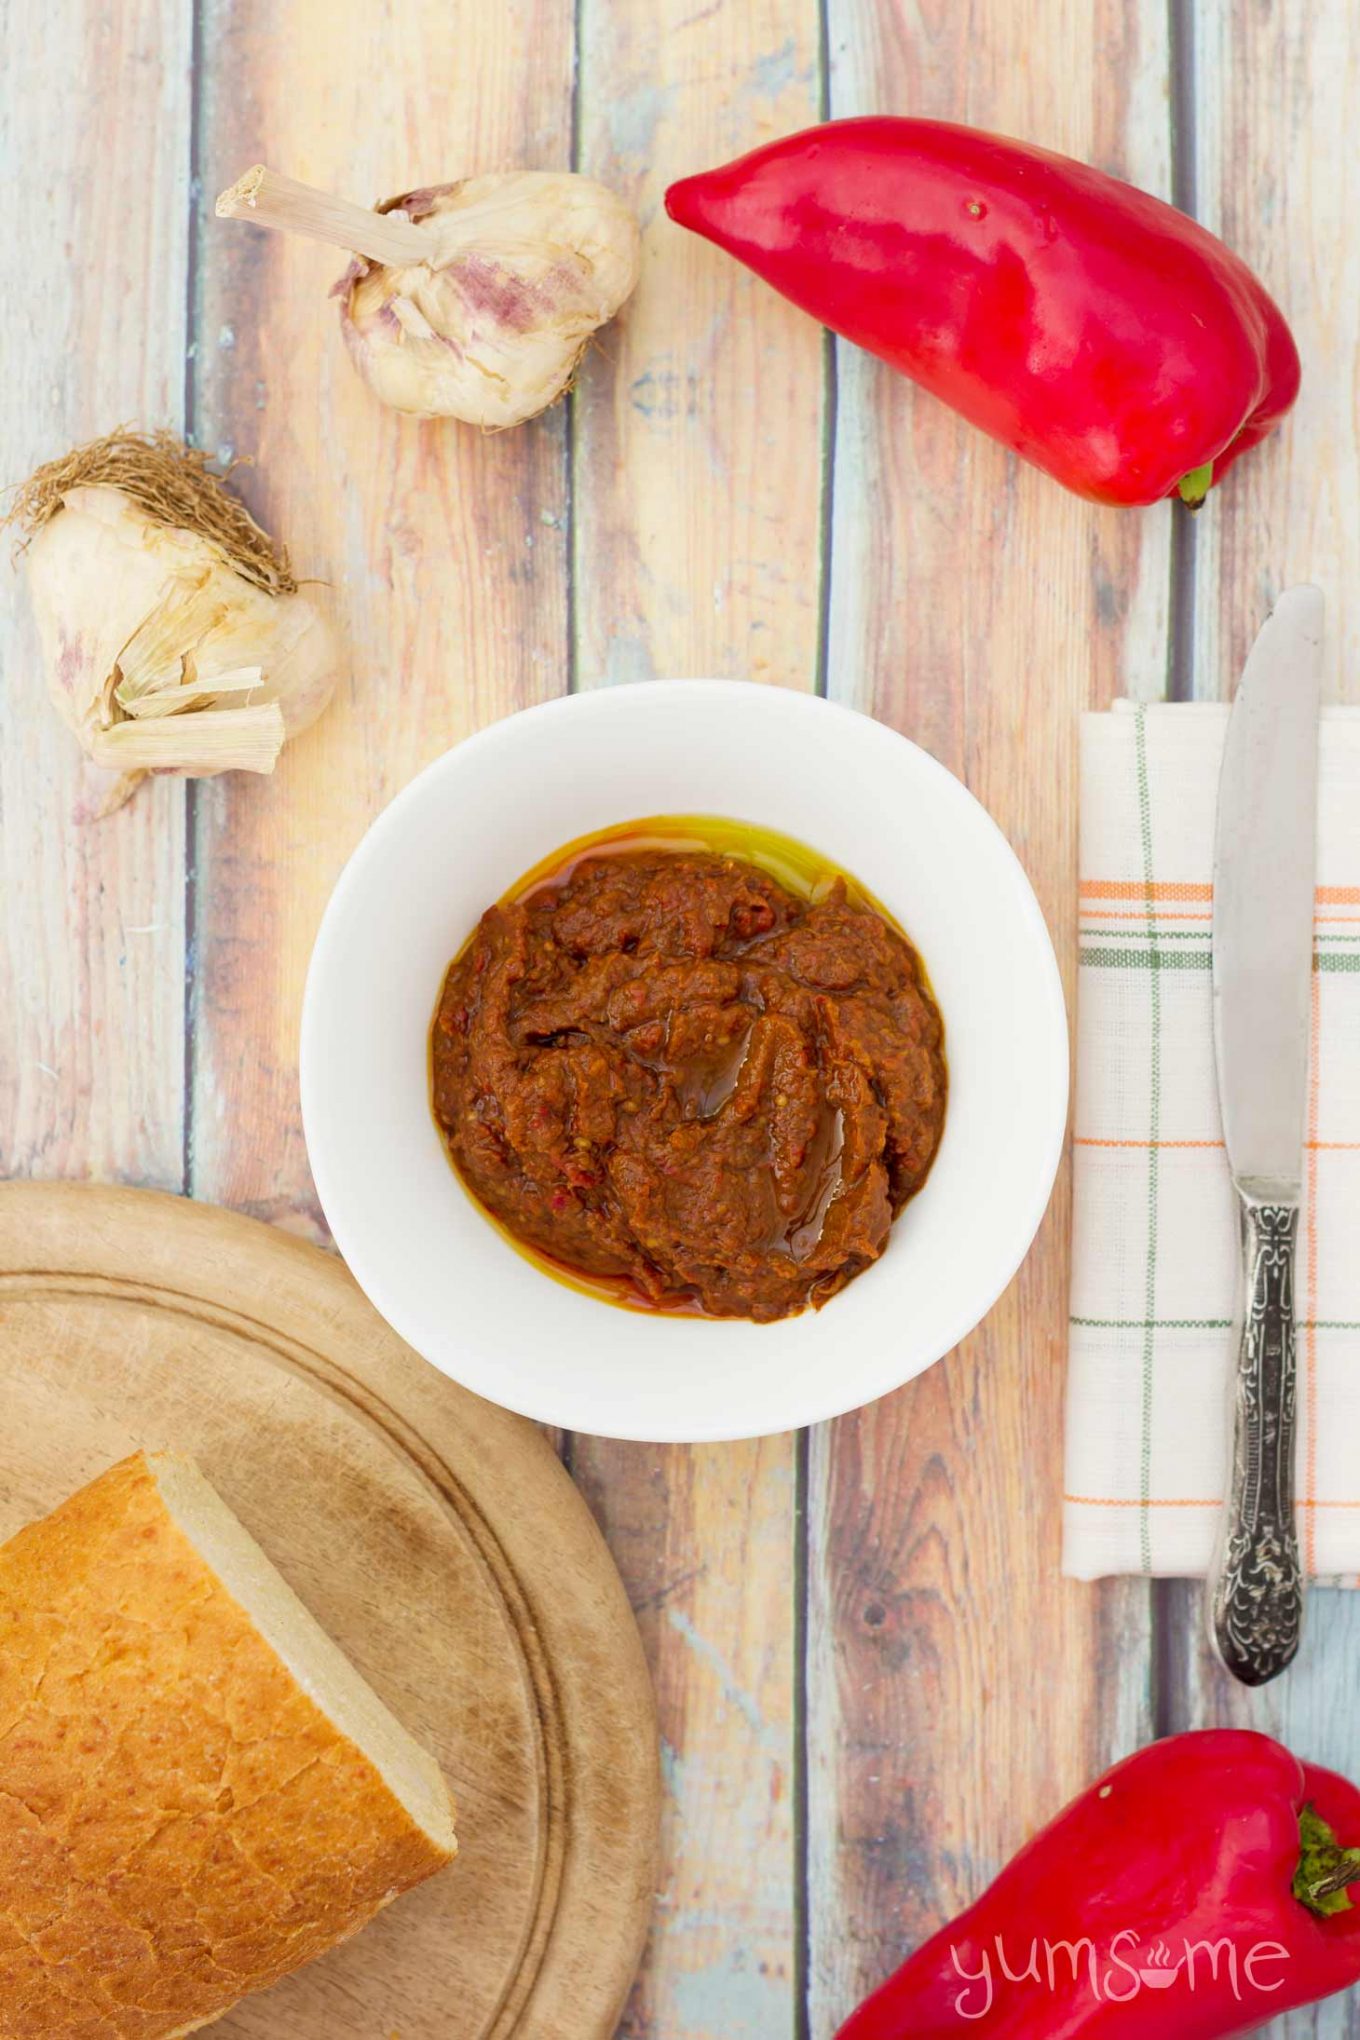 a bowl of ajvar on a table with some bread and red peppers | yumsome.com